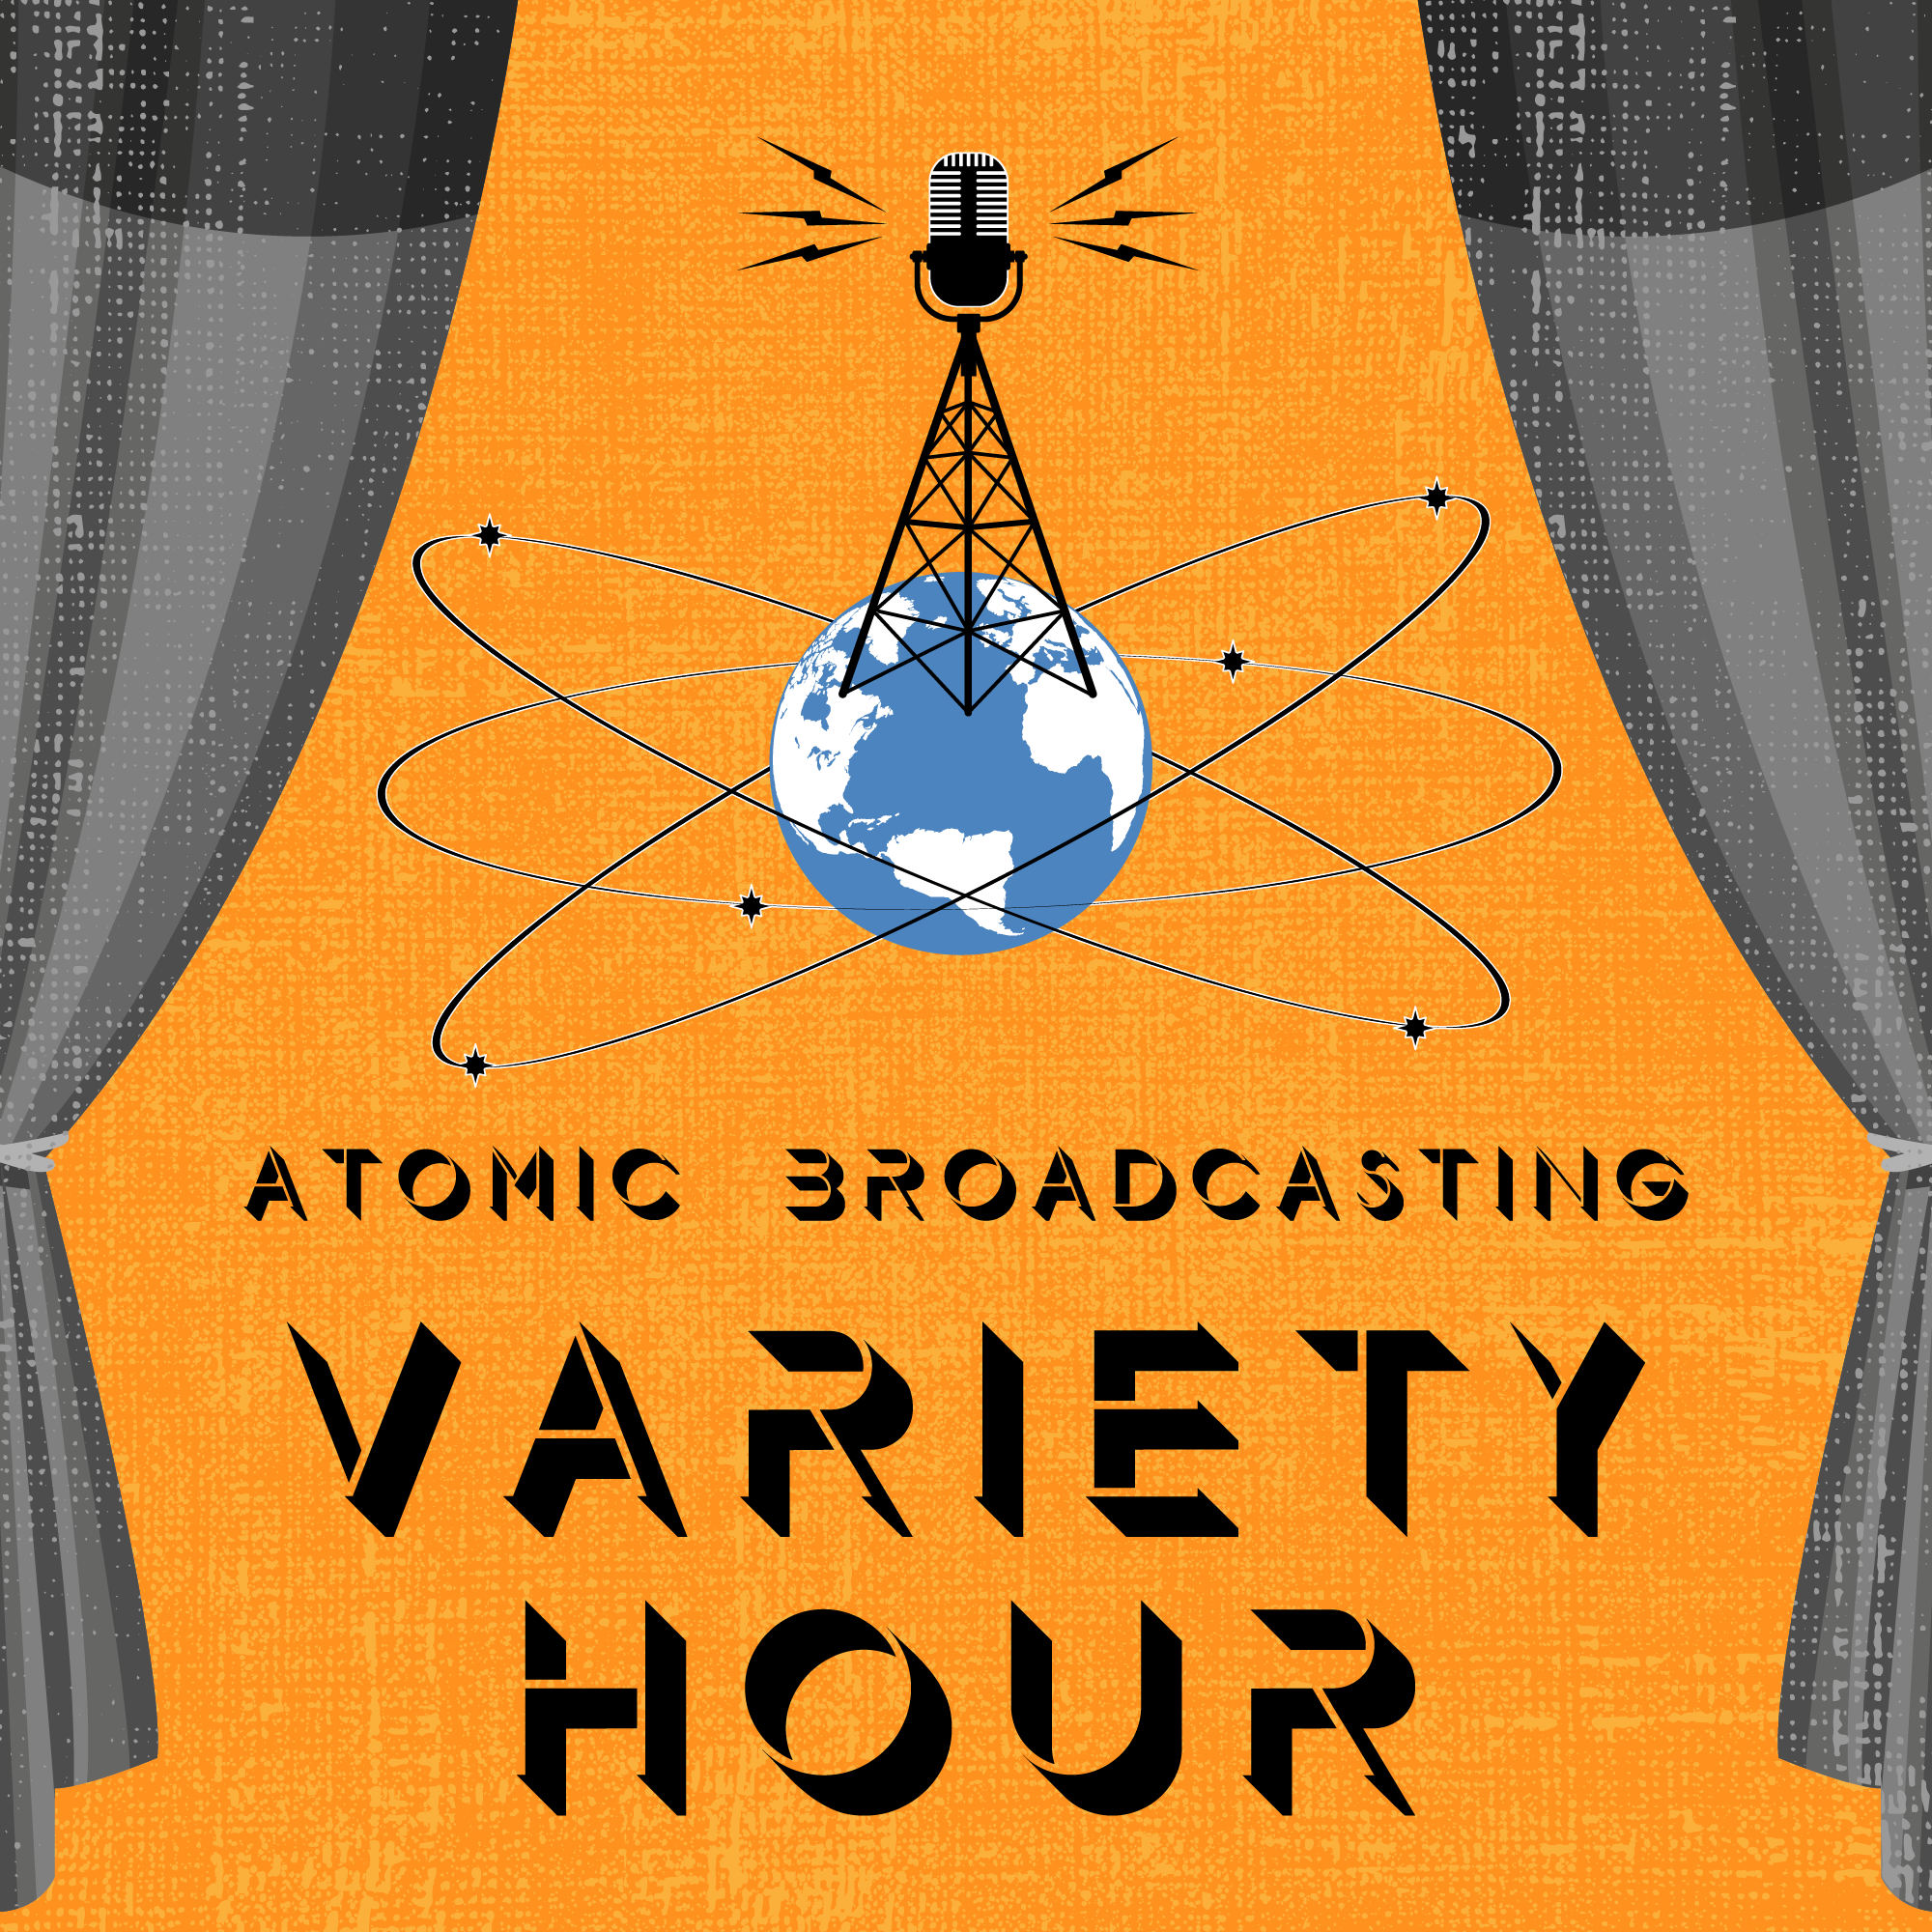 The Atomic Broadcasting Variety Hour